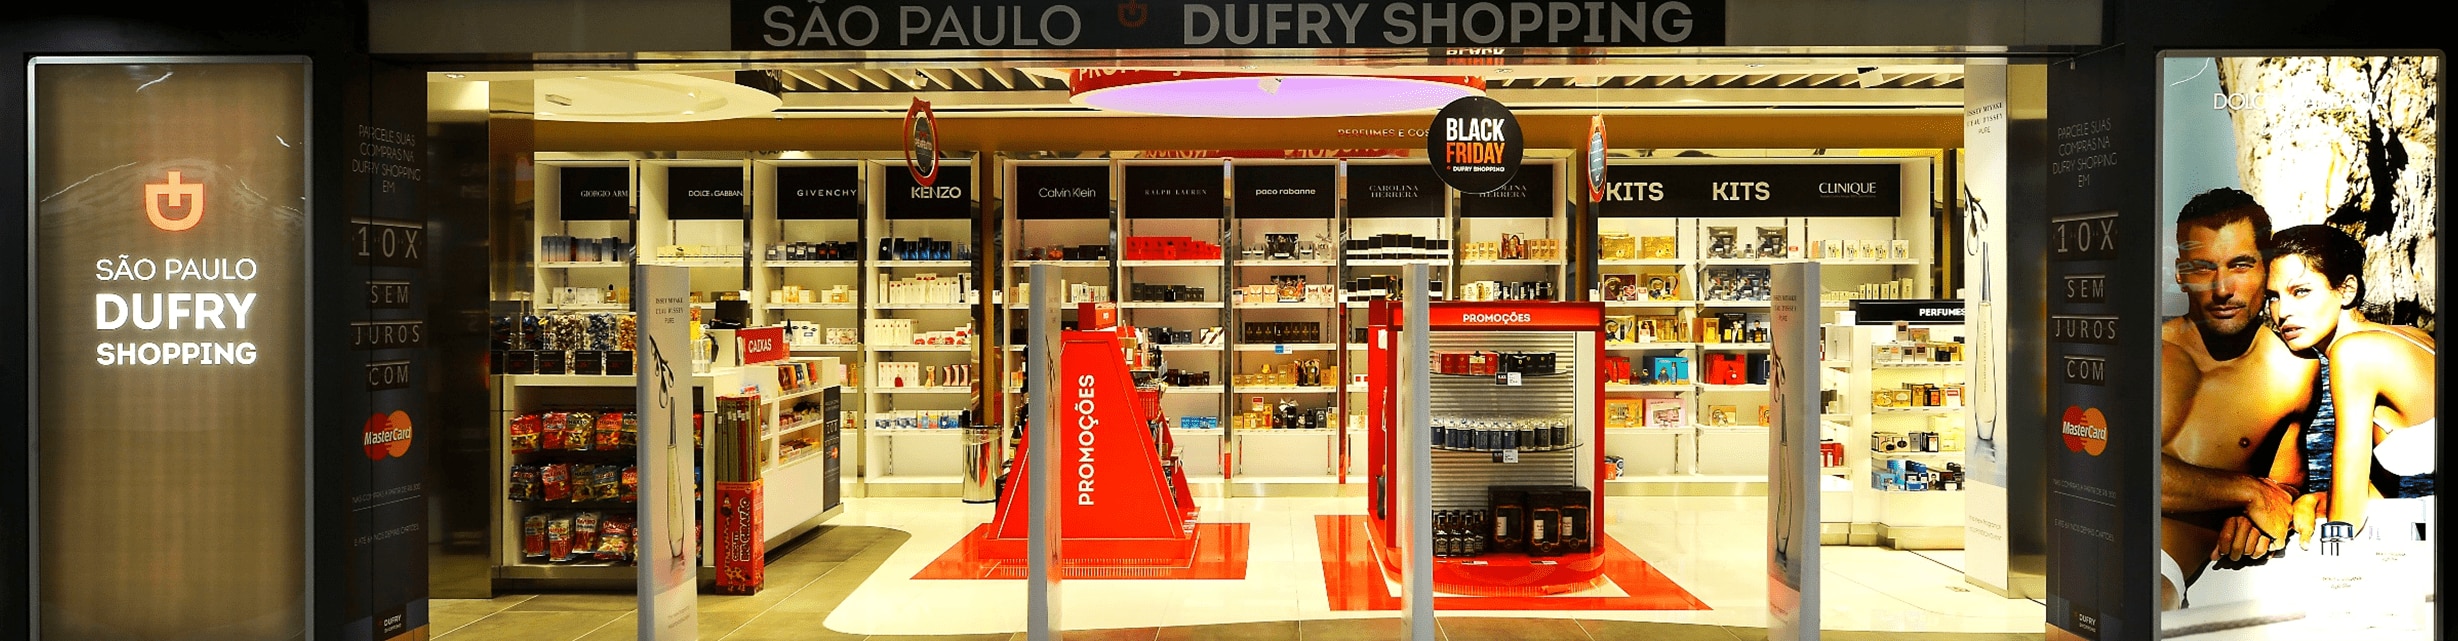 Dufry Shopping Guarulhos